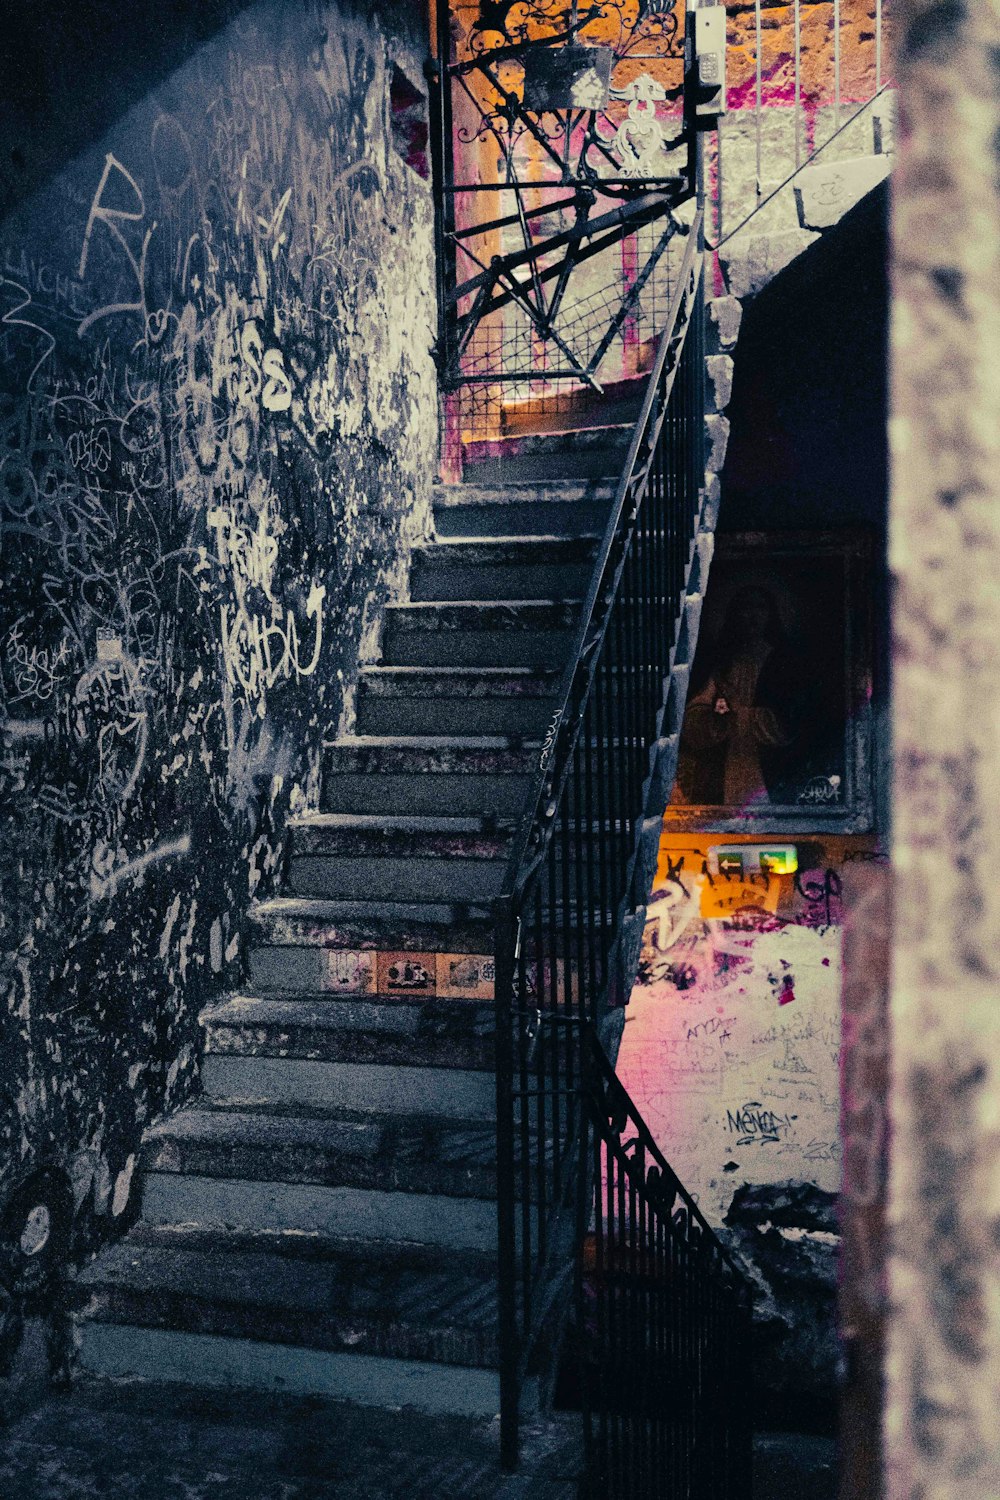 a set of stairs leading up to a graffiti covered wall